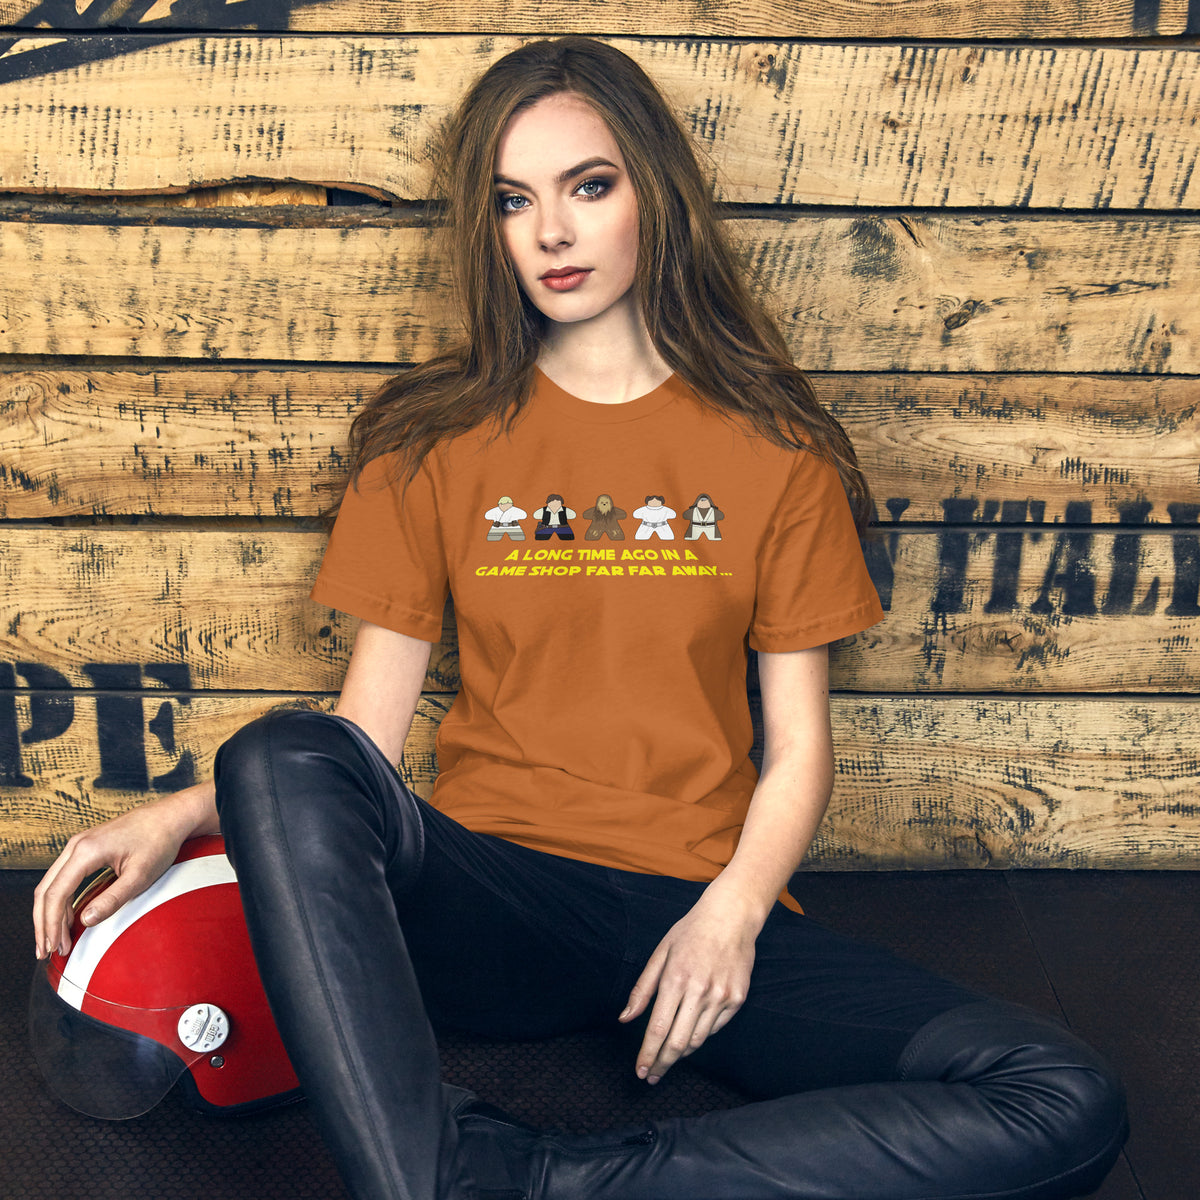 Bronze T-Shirt with Star Wars Meeples Parody Design on female model